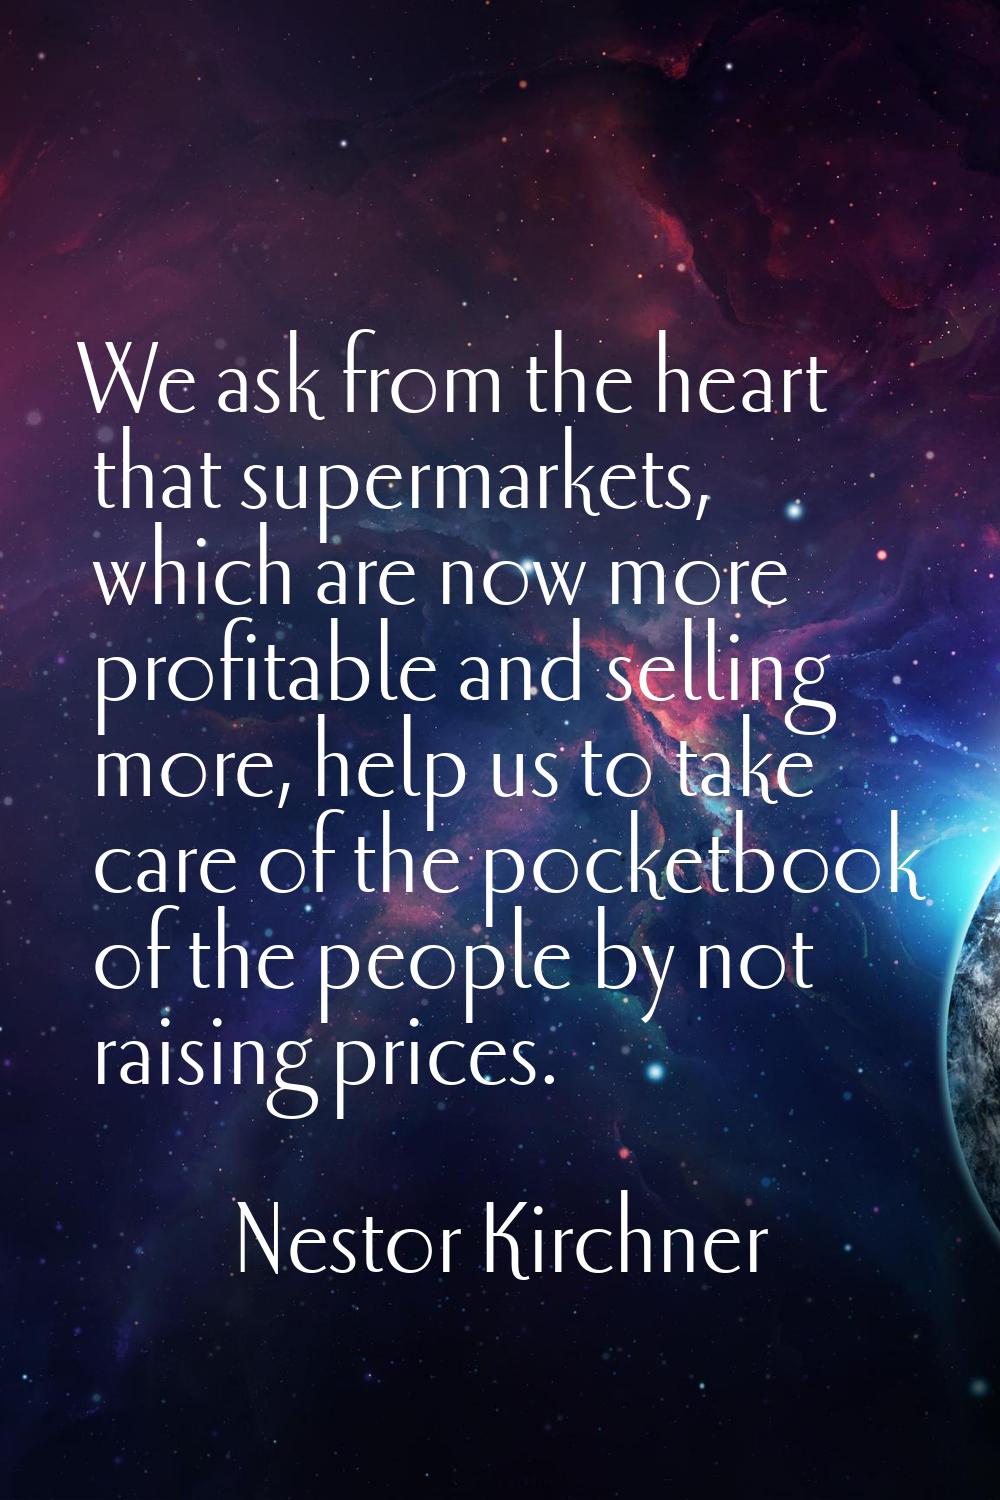 We ask from the heart that supermarkets, which are now more profitable and selling more, help us to